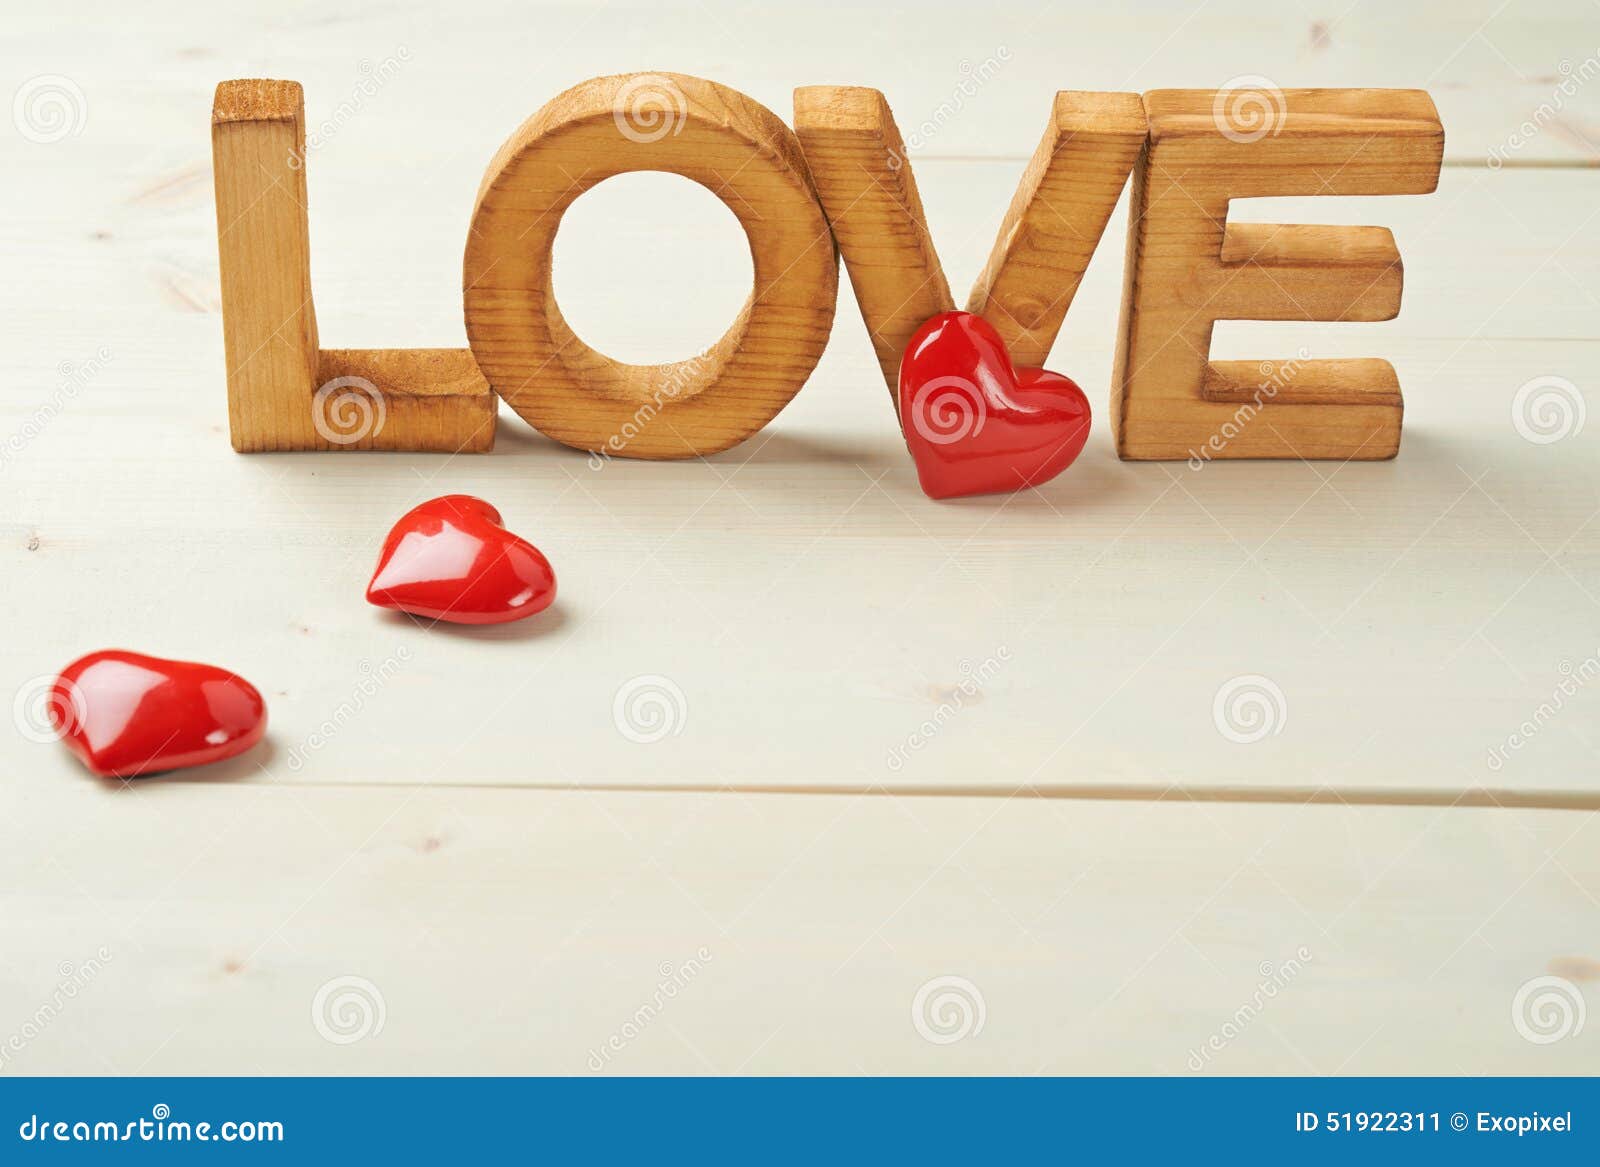 Word Love composition stock image. Image of rustic, decoration - 51922311